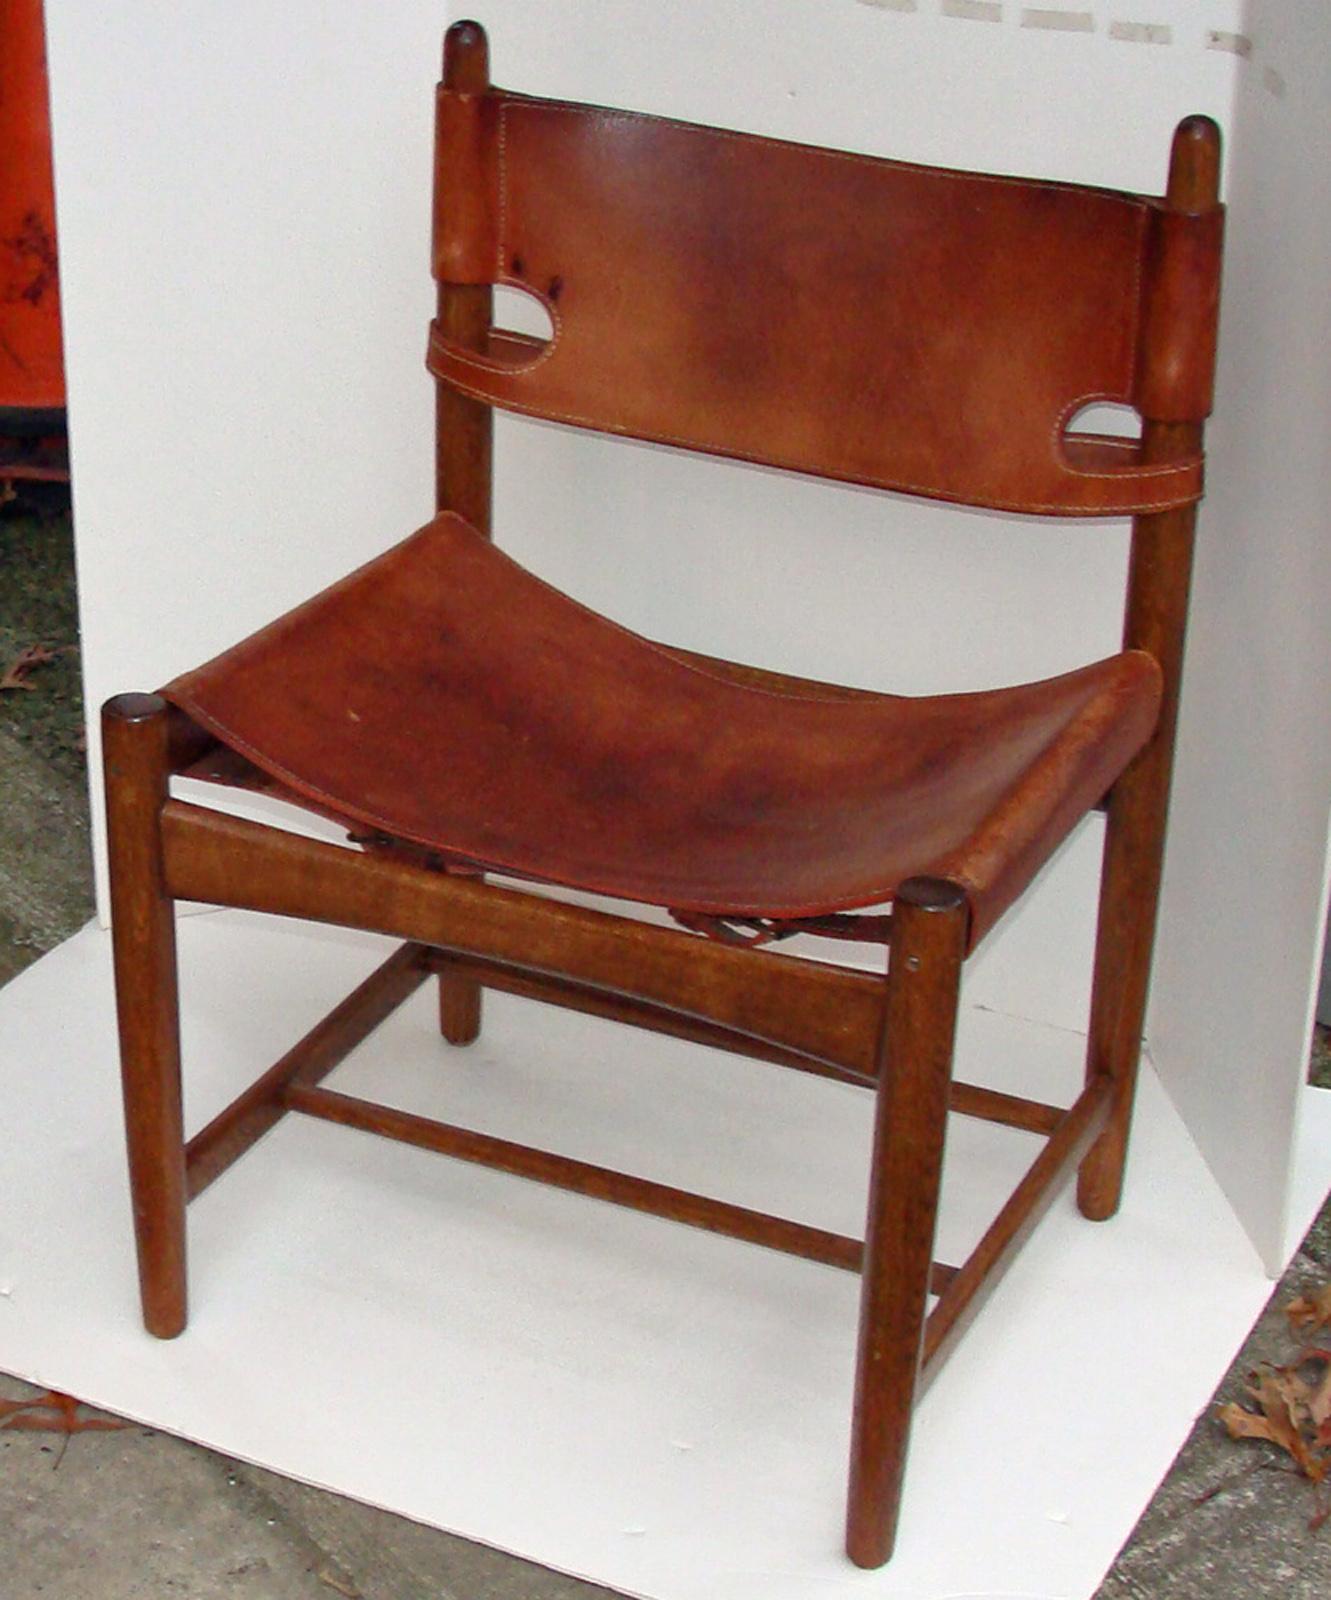 Mogensen chair from the 